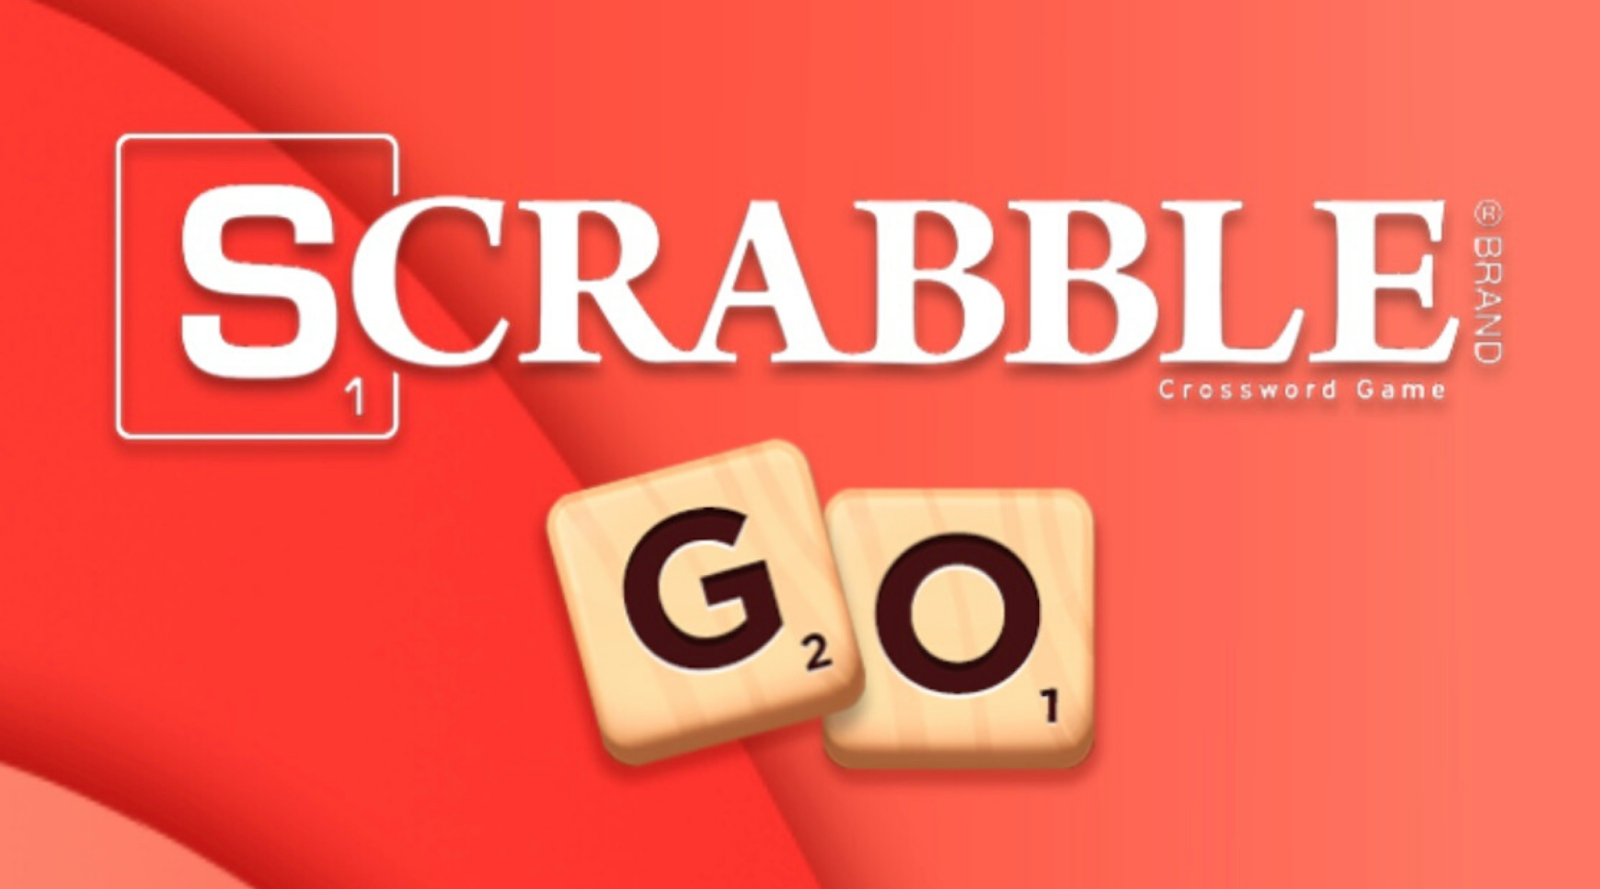 Orange and red background.Text: Scrabble Go. The 'S' in &quot;Scrabble&quot; is surrounded by a square with the number 1 in the lower right corner. The 'G' and 'O' in &quot;Go&quot; are in traditional Scrabble tiles with the number 2 in the lower right corner of the 'G' tile and the number 1 in the lower right corner of the 'O' tile. The text &quot;Crossword Game&quot; is written in small font below the 'L' and 'E' in &quot;scrabble&quot;.